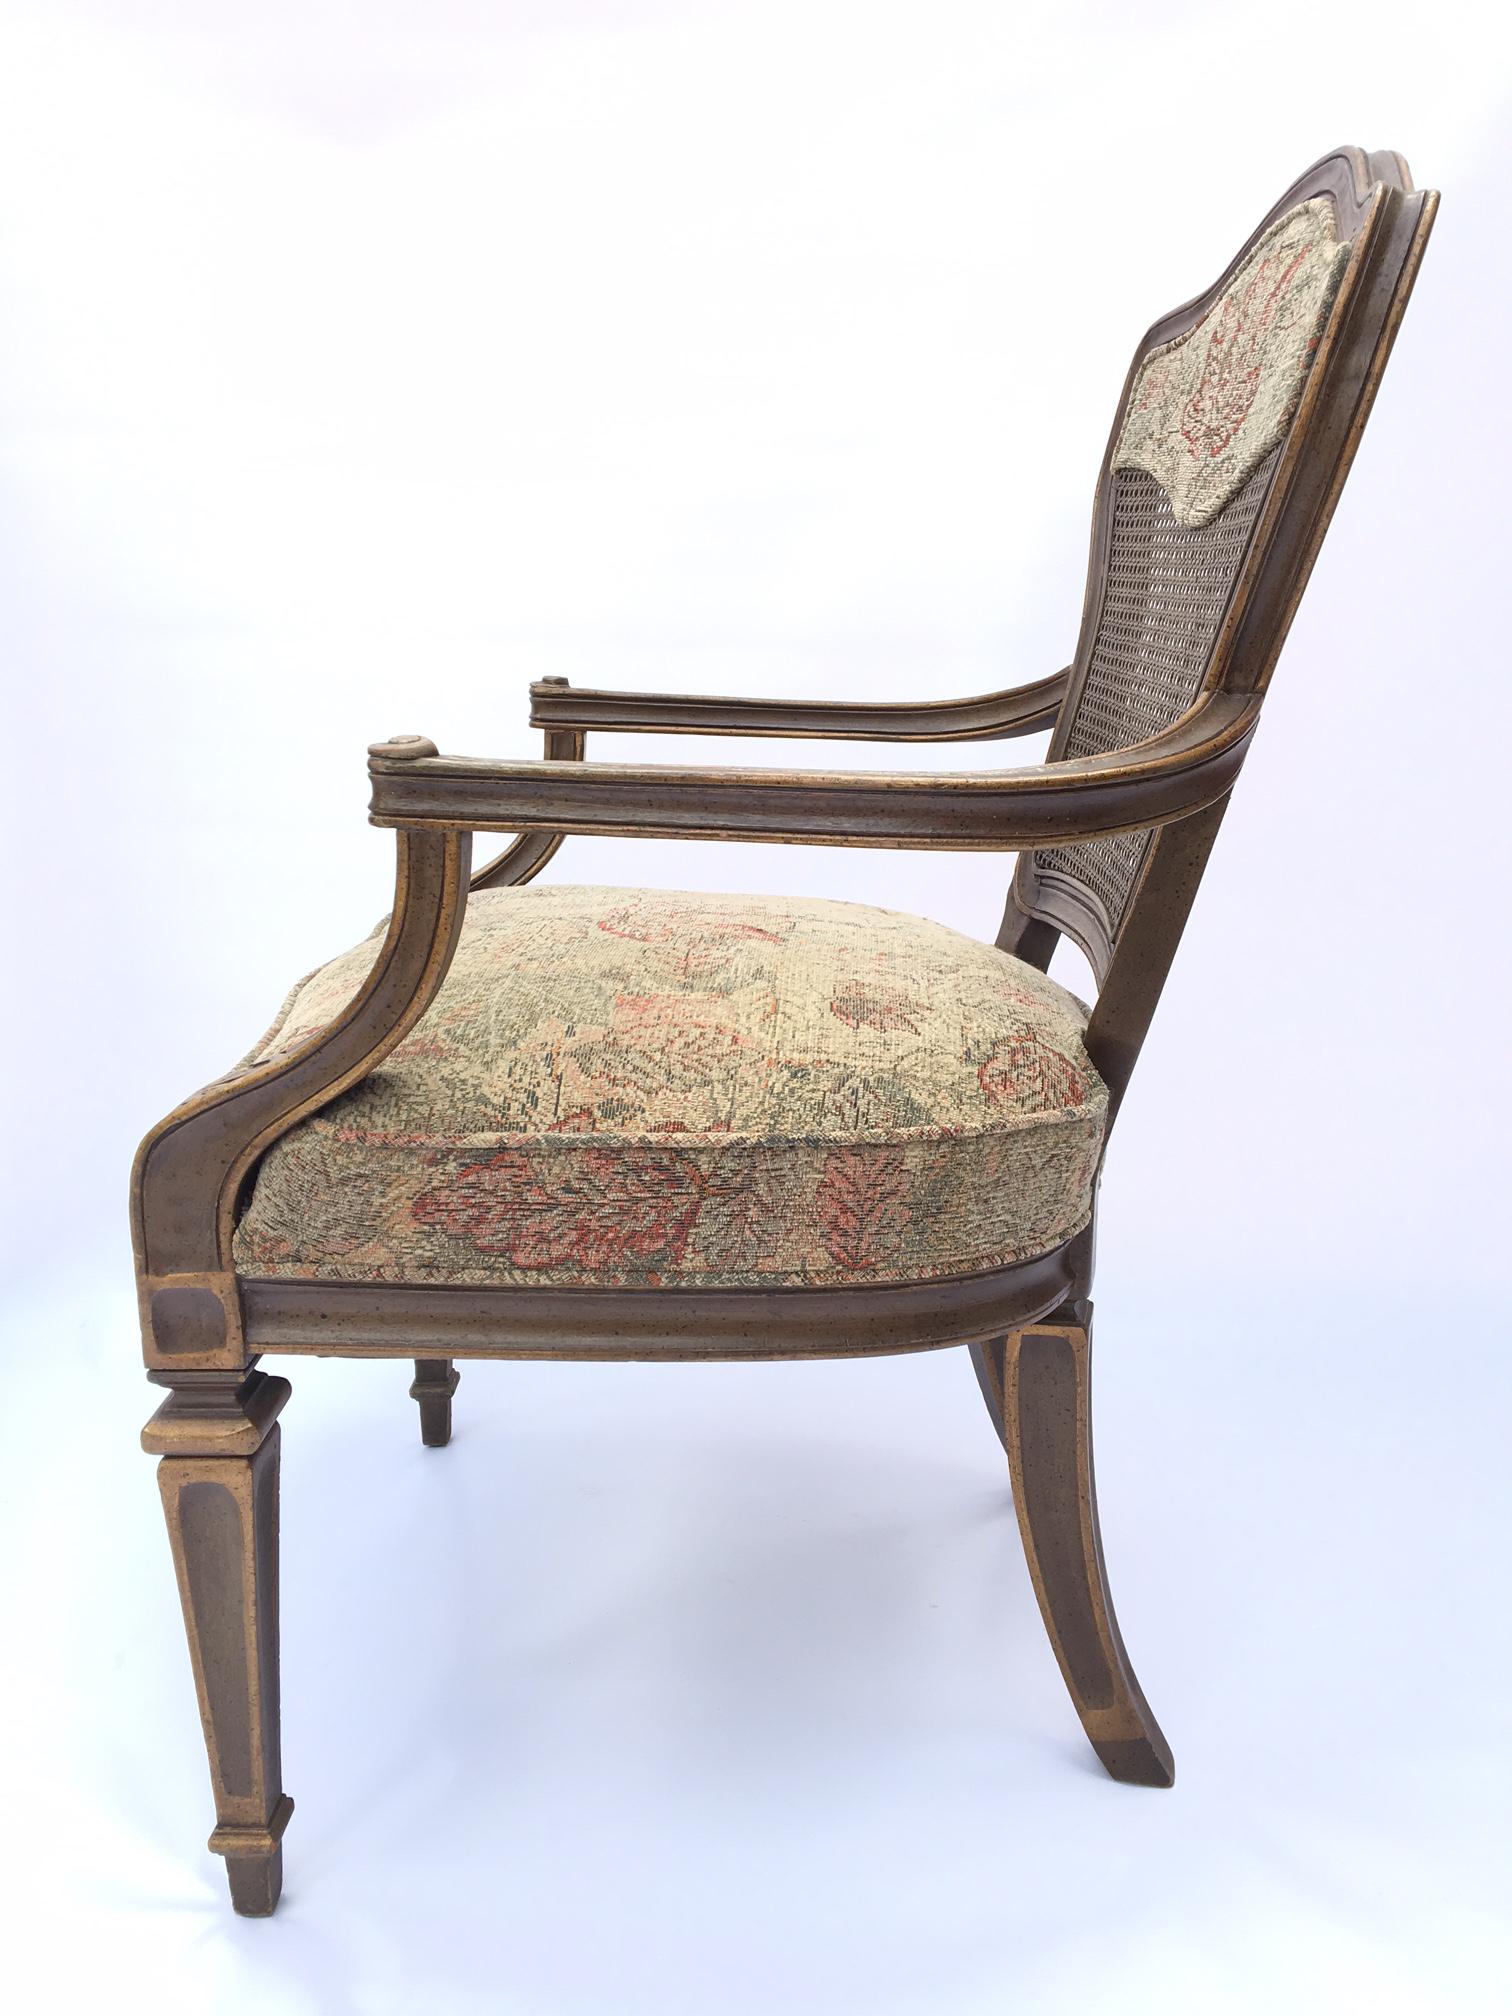 Pair of cane back arm chairs upholstered in floral tapestry. Good vintage condition with minor wear consistent with age.